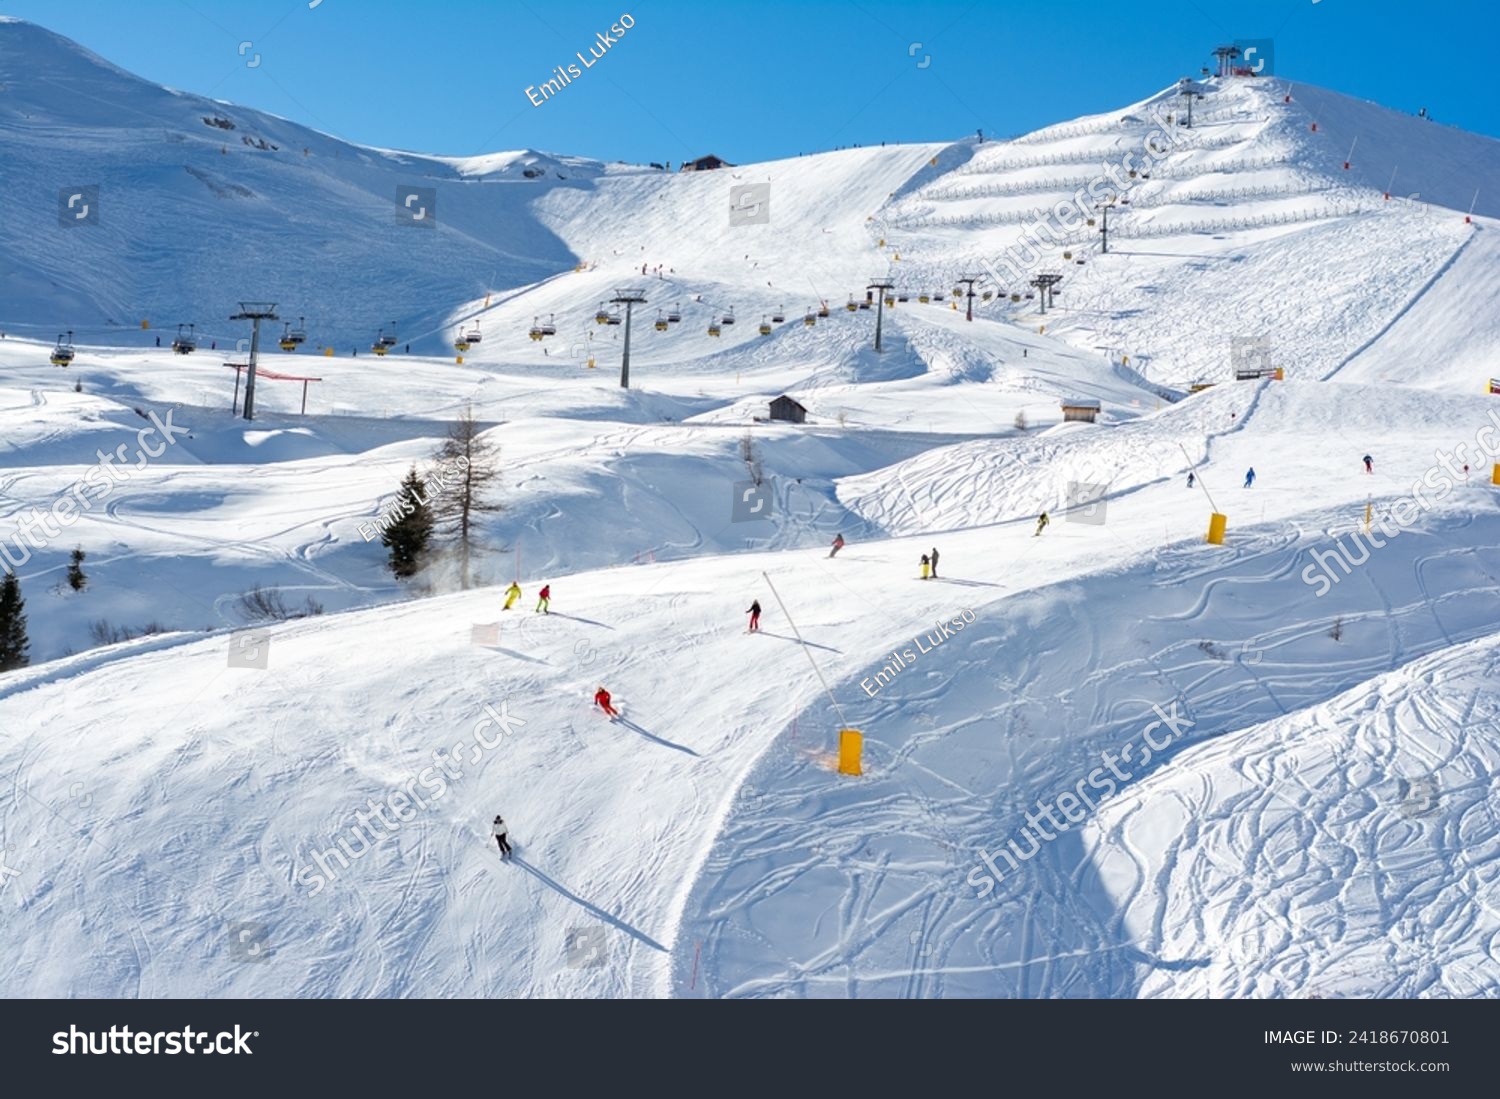 Ski resort in the Dolomites. Mountain recreation place. Ski slopes in the Dolomites on a clear sunny day. Alpine skiing sport and recreation. #2418670801